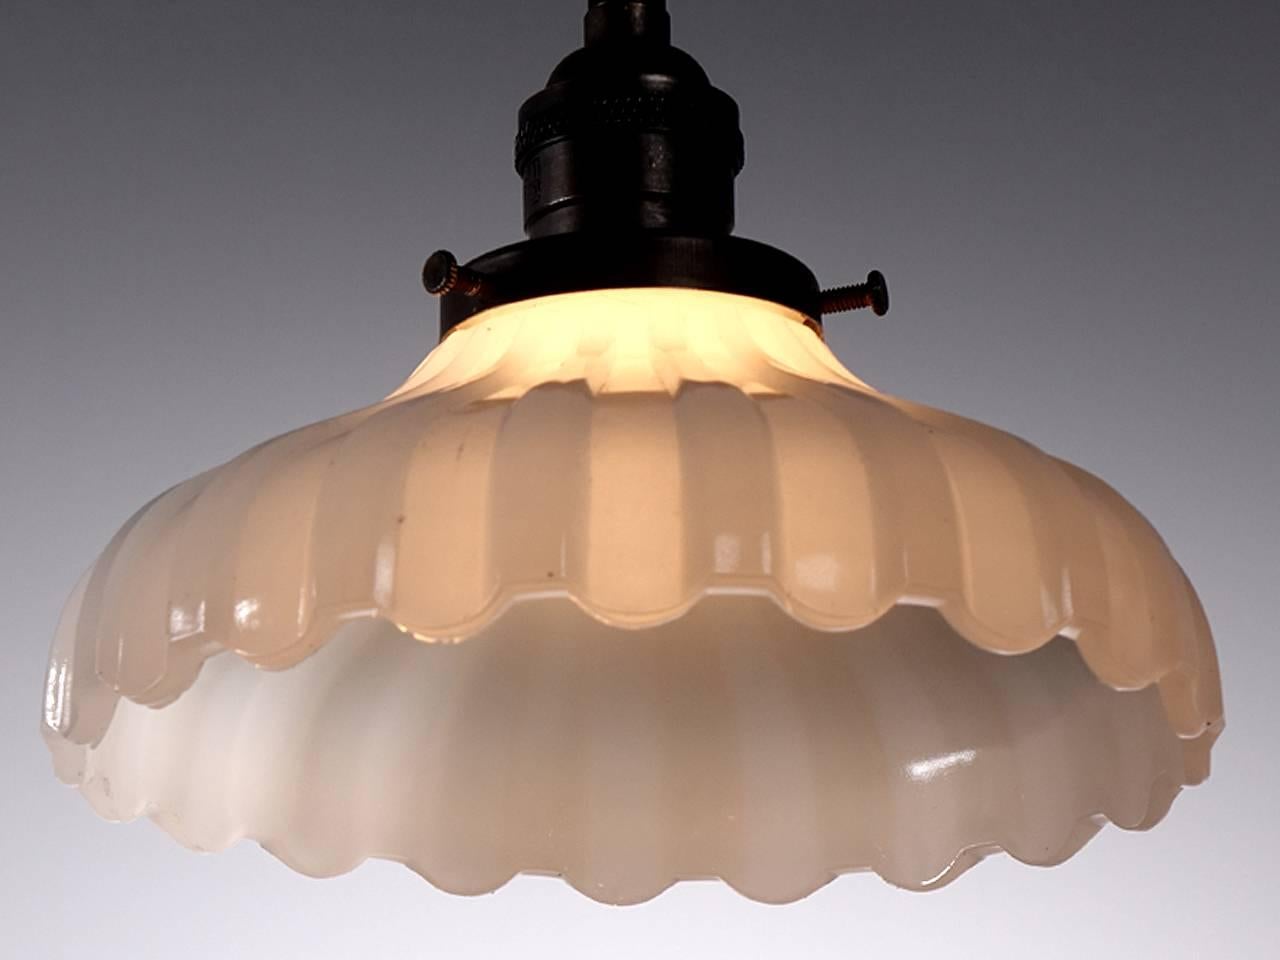 Softly curved bell shaped pendants are a classic. They feel at home with any style decor. This example is an extra heavy ribbon pattern milk glass with a scalloped edge. The lamps are priced per so you can buy only one or the collection.